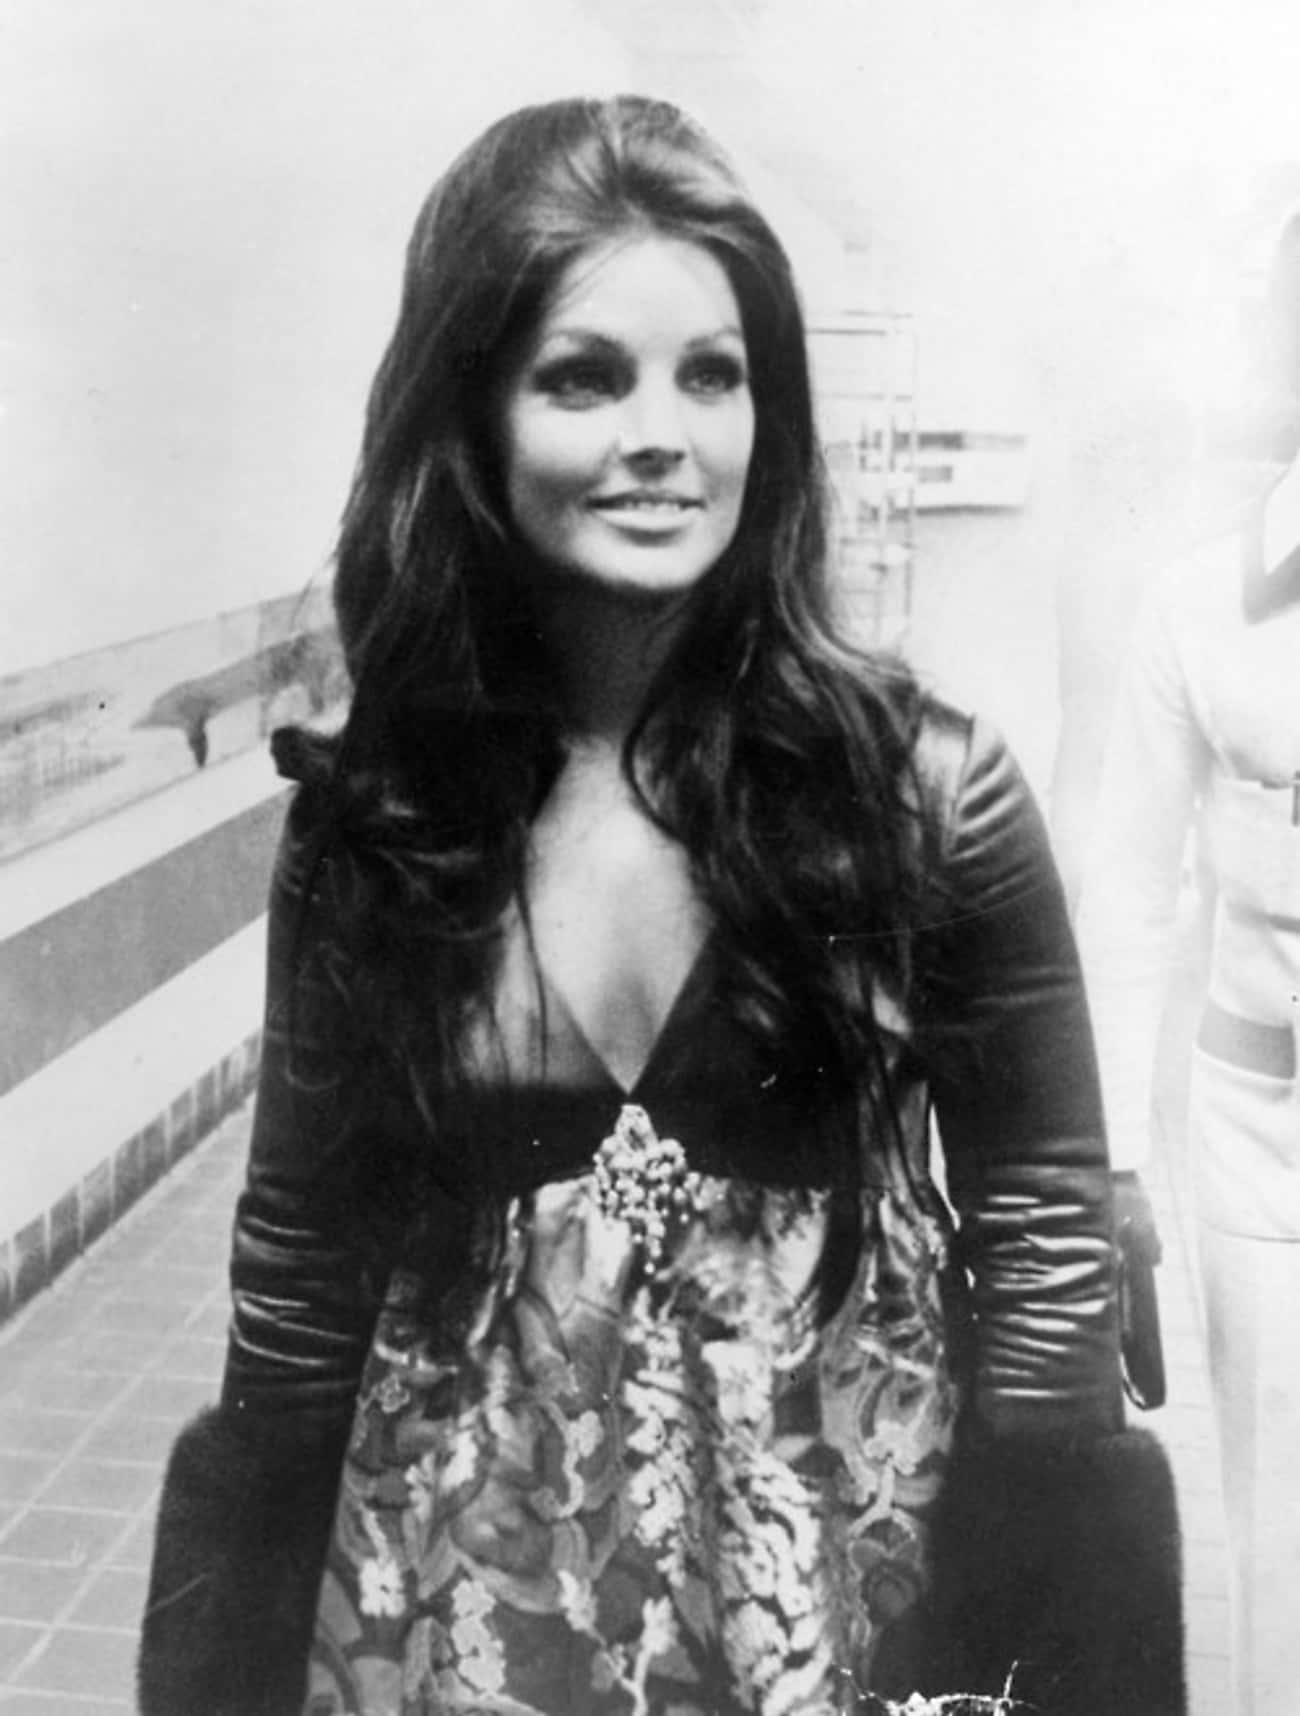 Young Priscilla Presley in a Patterned Dress